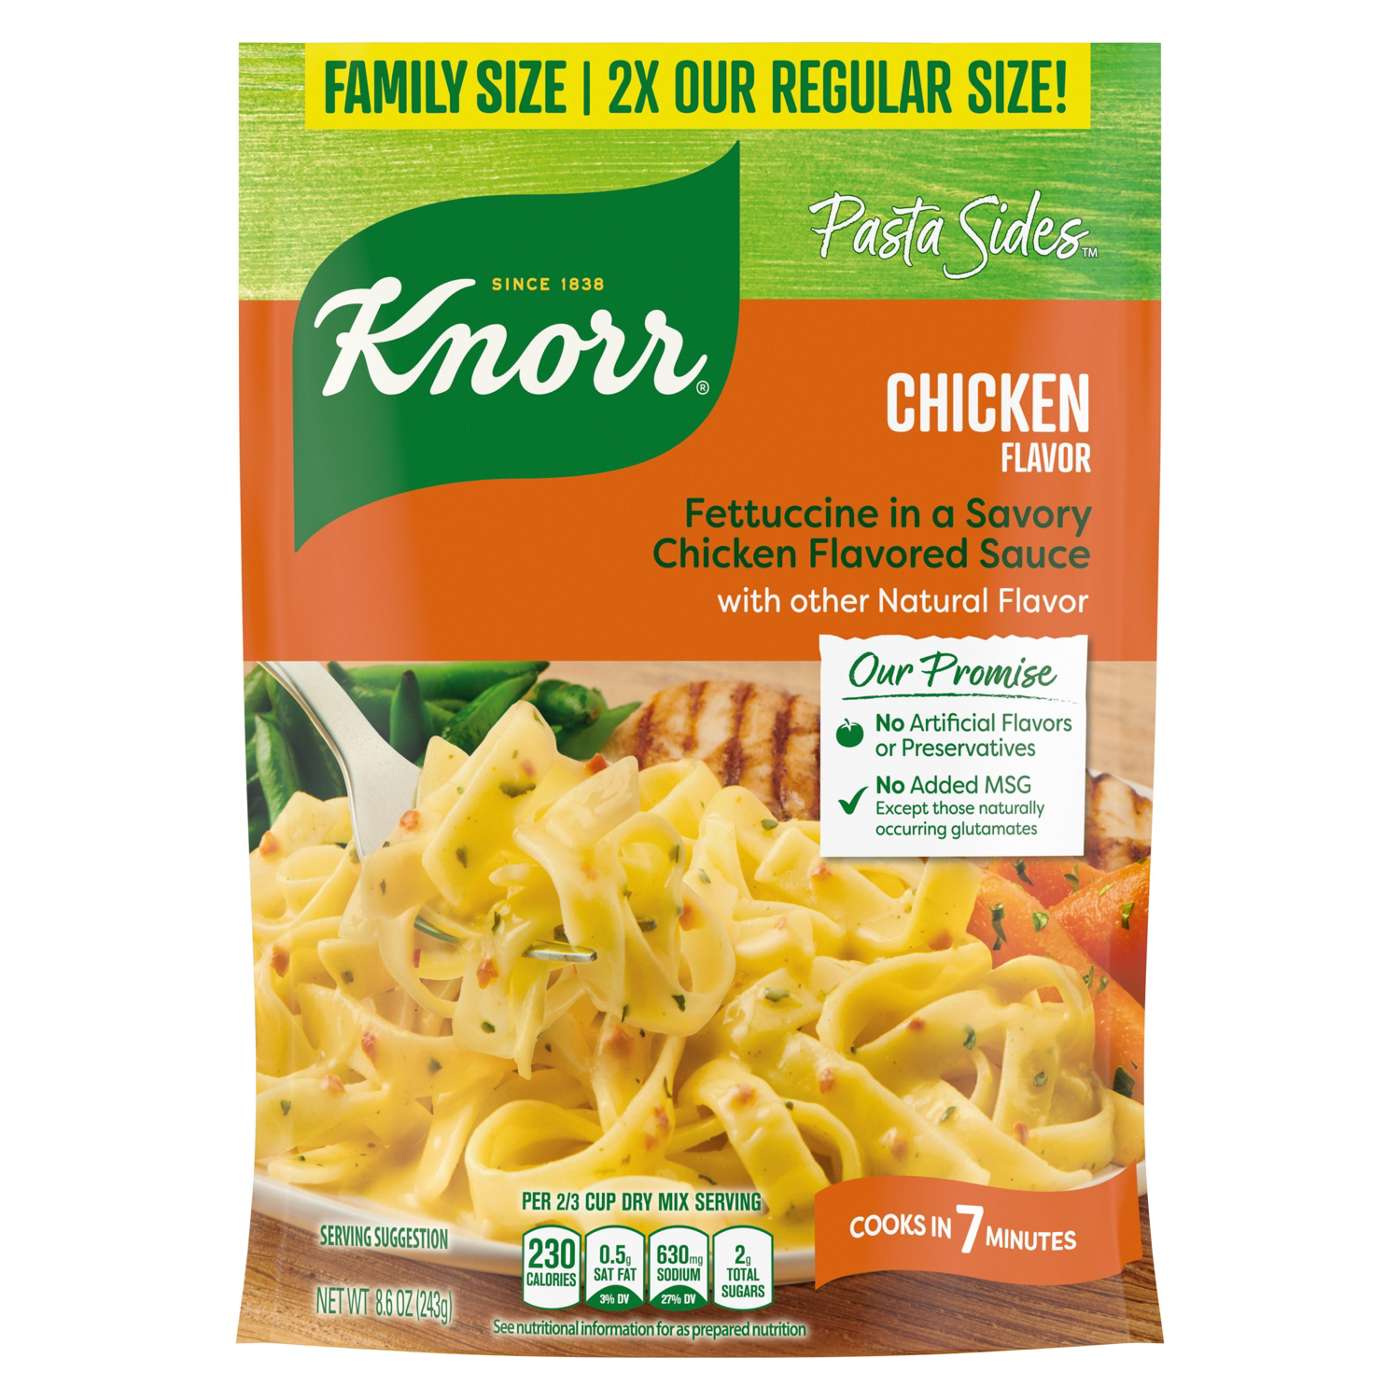 Knorr Pasta Sides Chicken Flavor Fettuccine Family Size; image 1 of 3